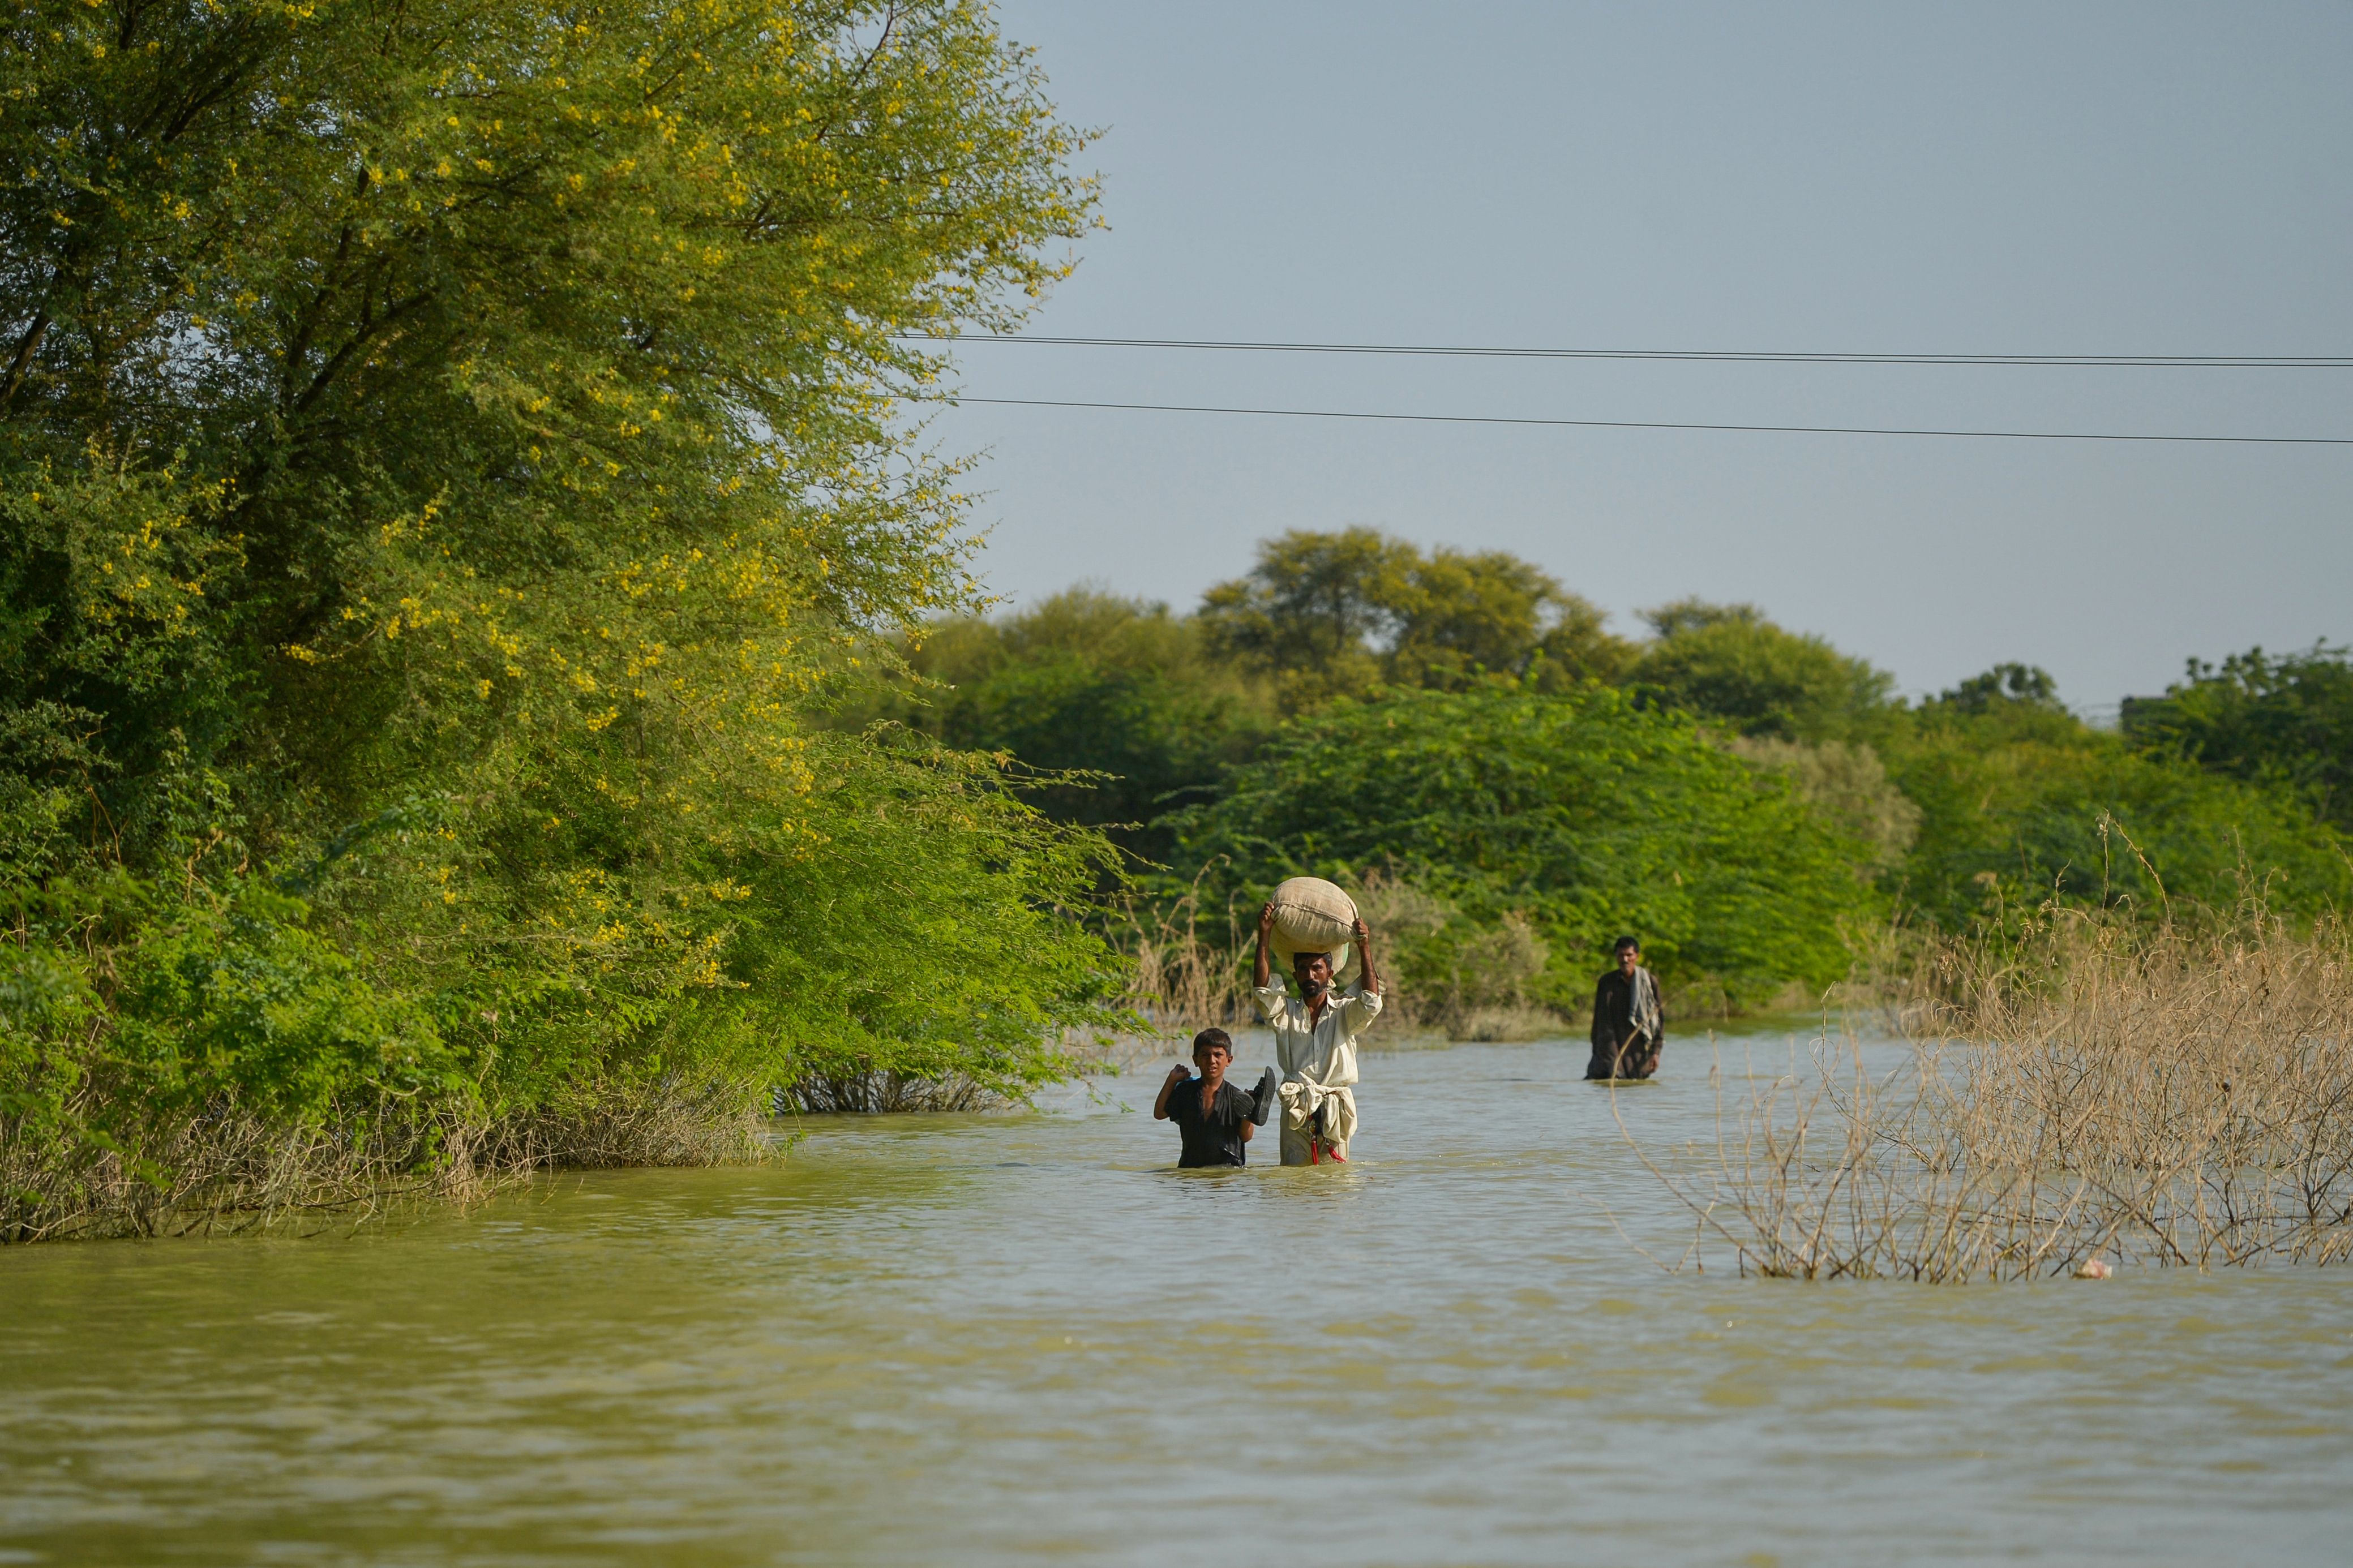 Flooding in 2022 put a third of Pakistan underwater, displaced eight million and caused about $28 billion in damages.